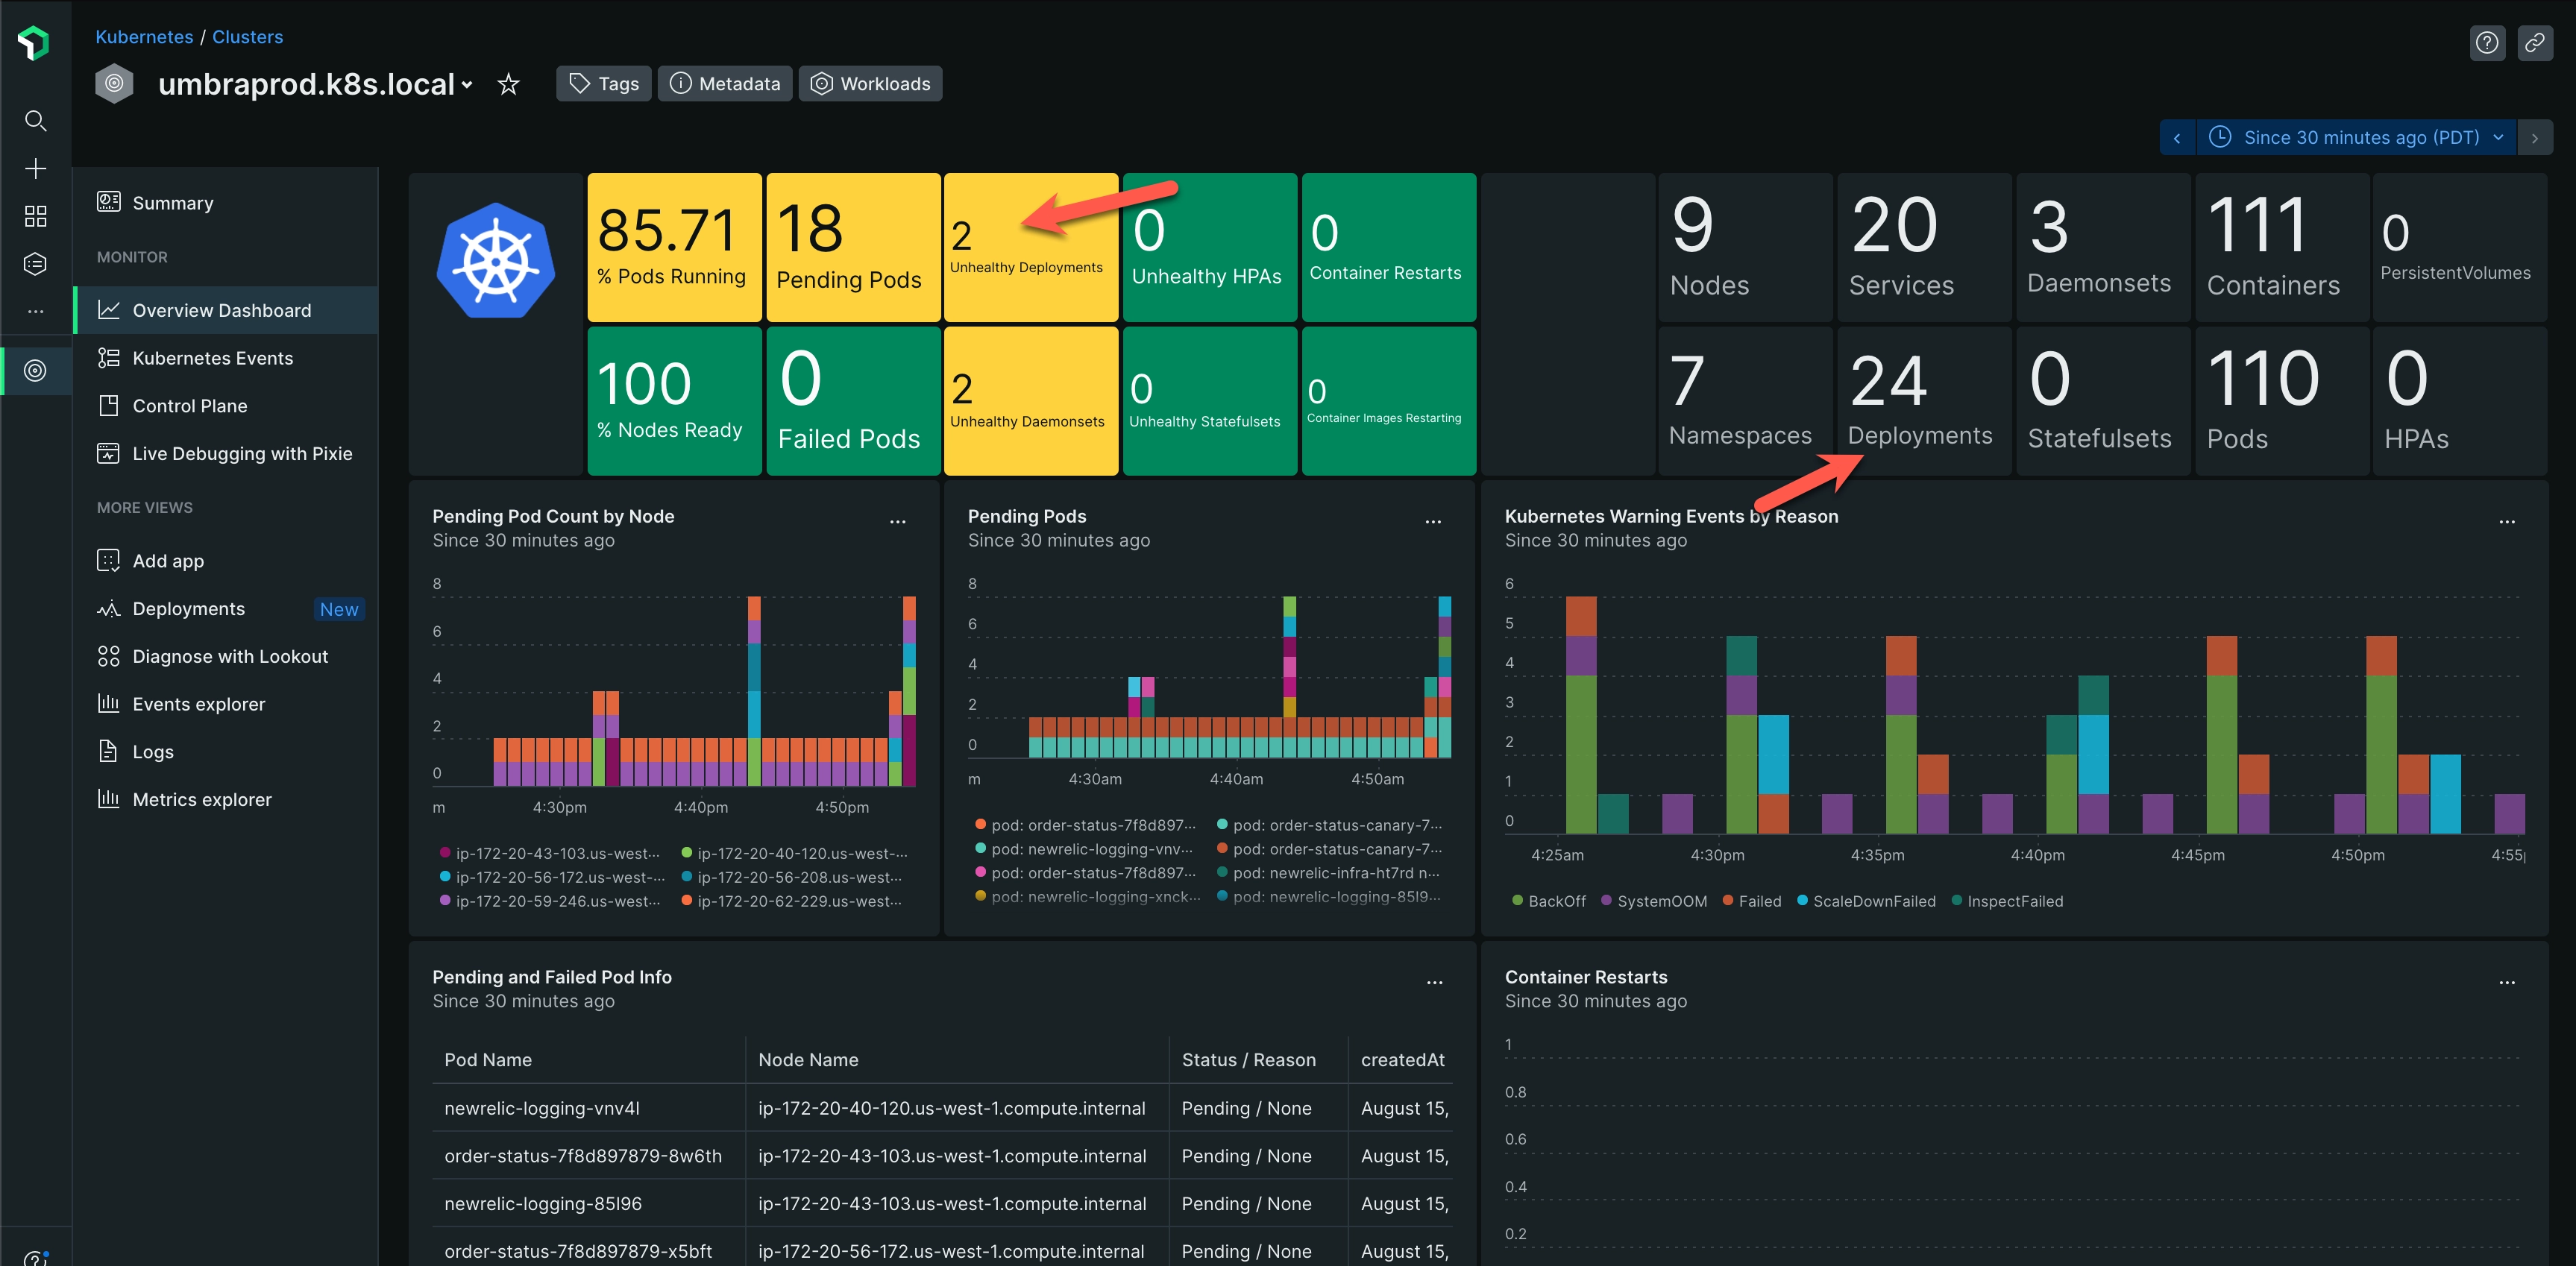 The main overview dashboard for the kubernetes capability